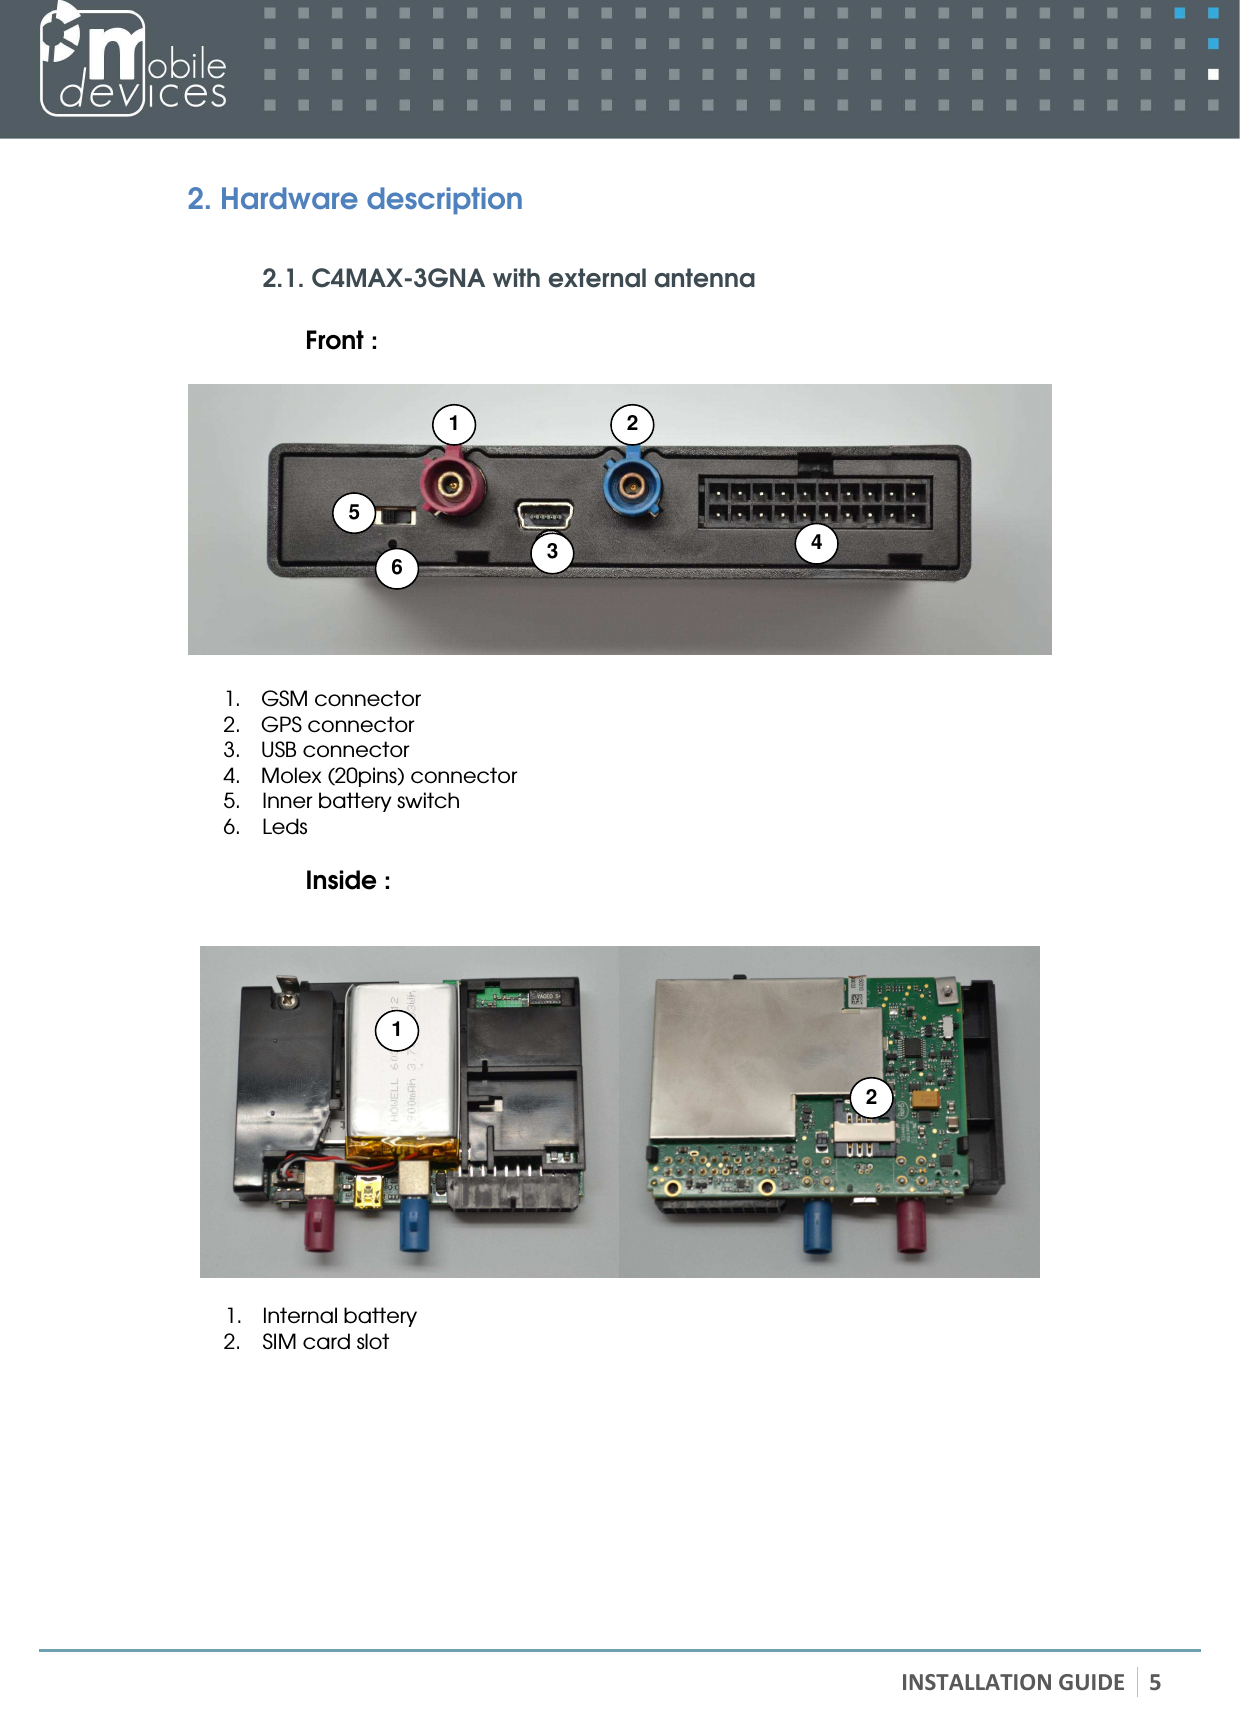   INSTALLATION GUIDE 5 2. Hardware description  2.1. C4MAX-3GNA with external antenna  Front :    1. GSM connector 2. GPS connector 3. USB connector 4. Molex (20pins) connector 5. Inner battery switch 6. Leds  Inside :     1. Internal battery 2. SIM card slot  2 1 4 5 3  6 1 2 